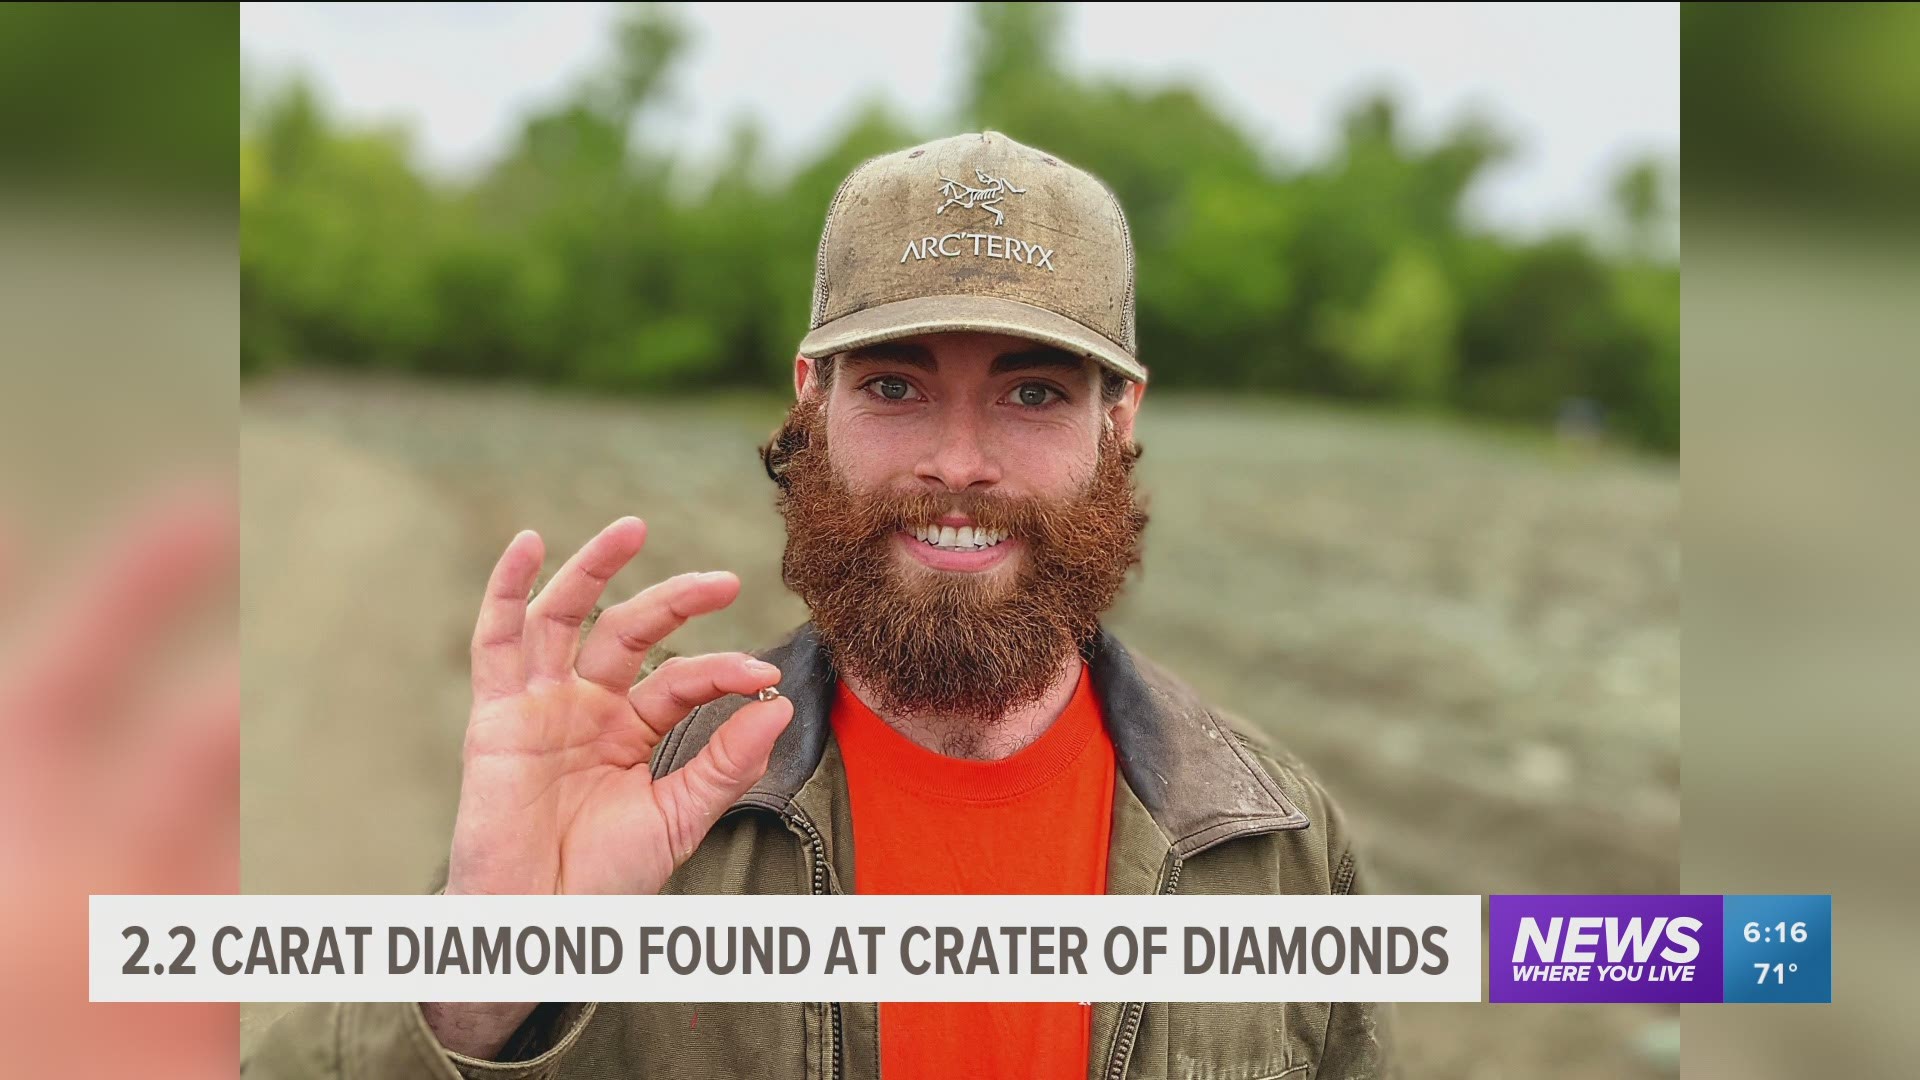 Christian Liden is traveling around America mining for materials to make an engagement ring and he found a 2.2 carat diamond at the Crater of Diamonds State Park.